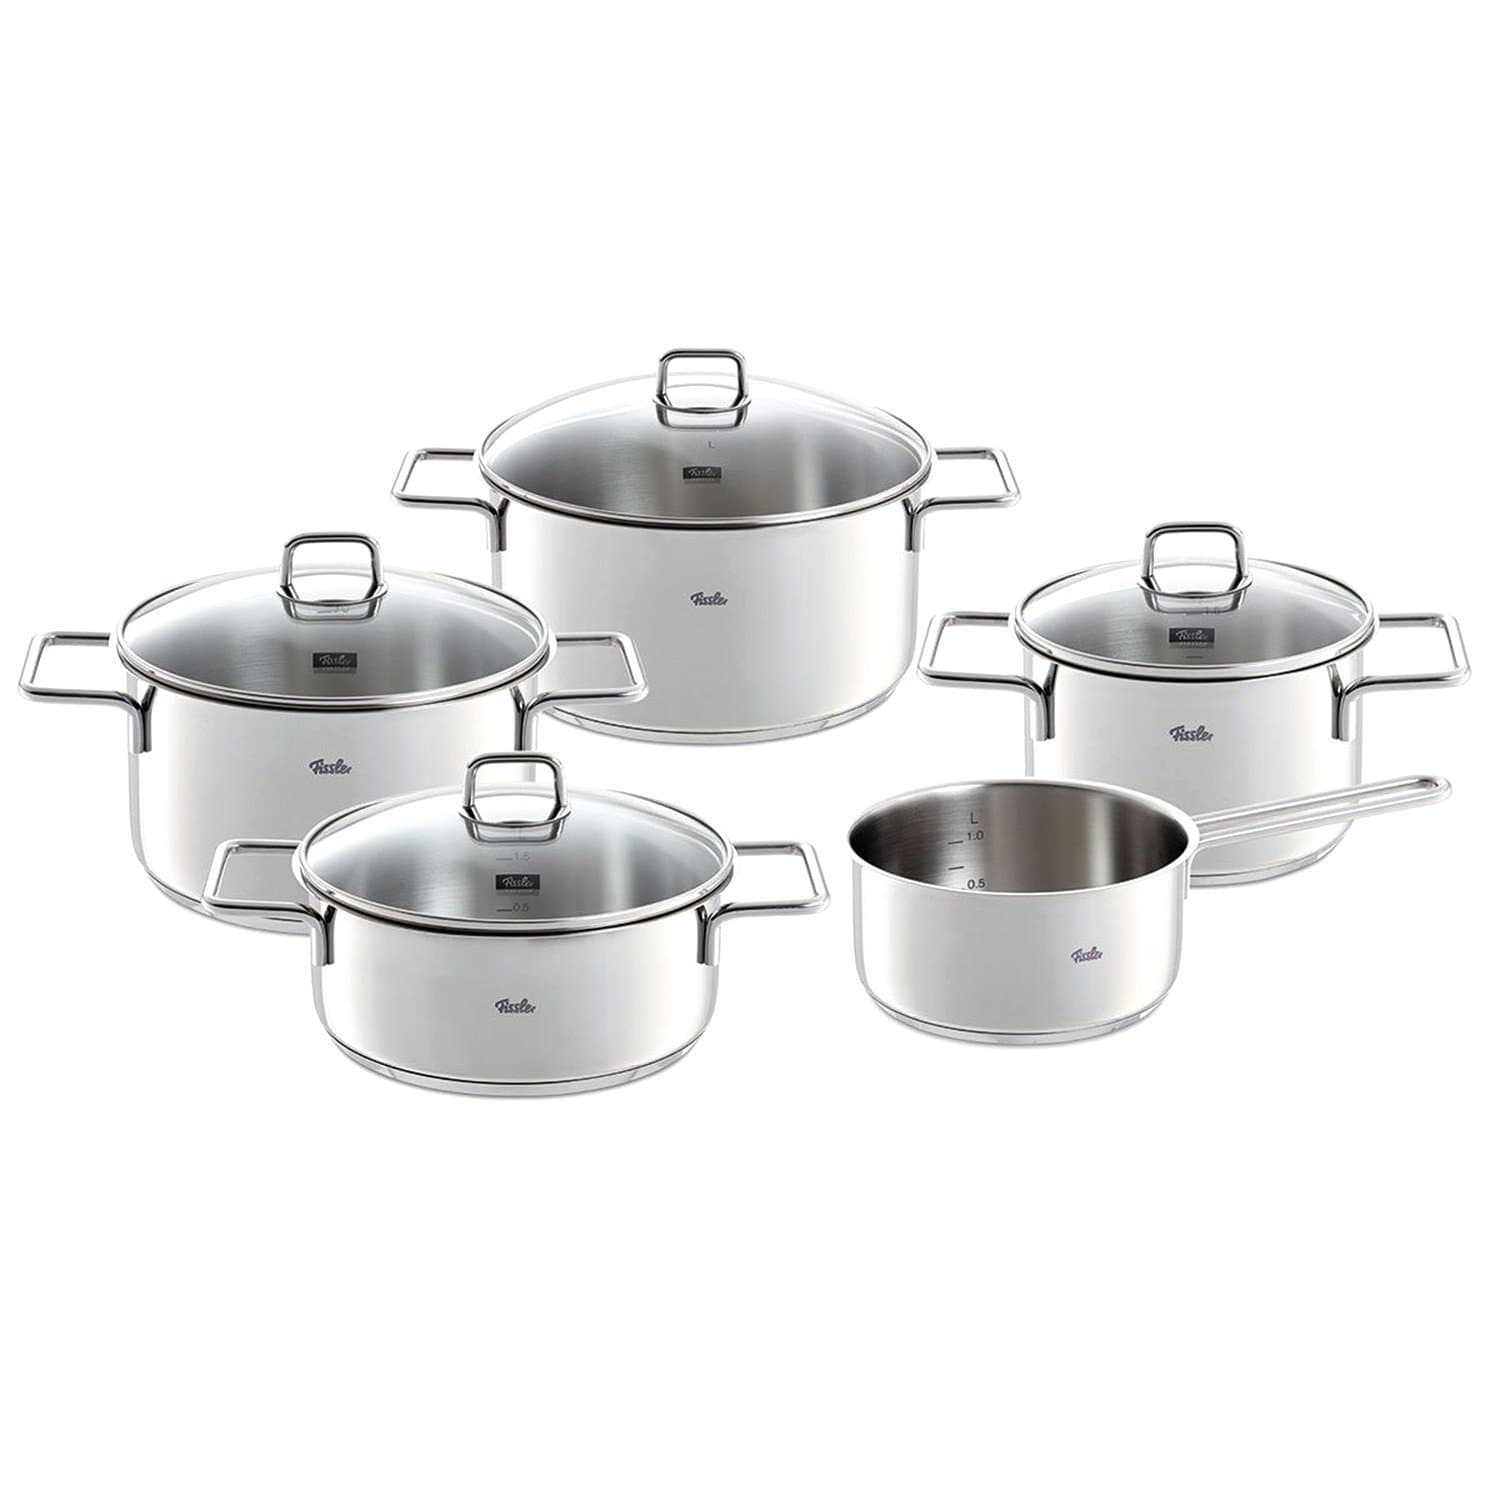 Fissler Munchen Stainless Steel Cookware Set with 4 Glass Lids - 5 Piece - 086-113-05-000/0 - Jashanmal Home